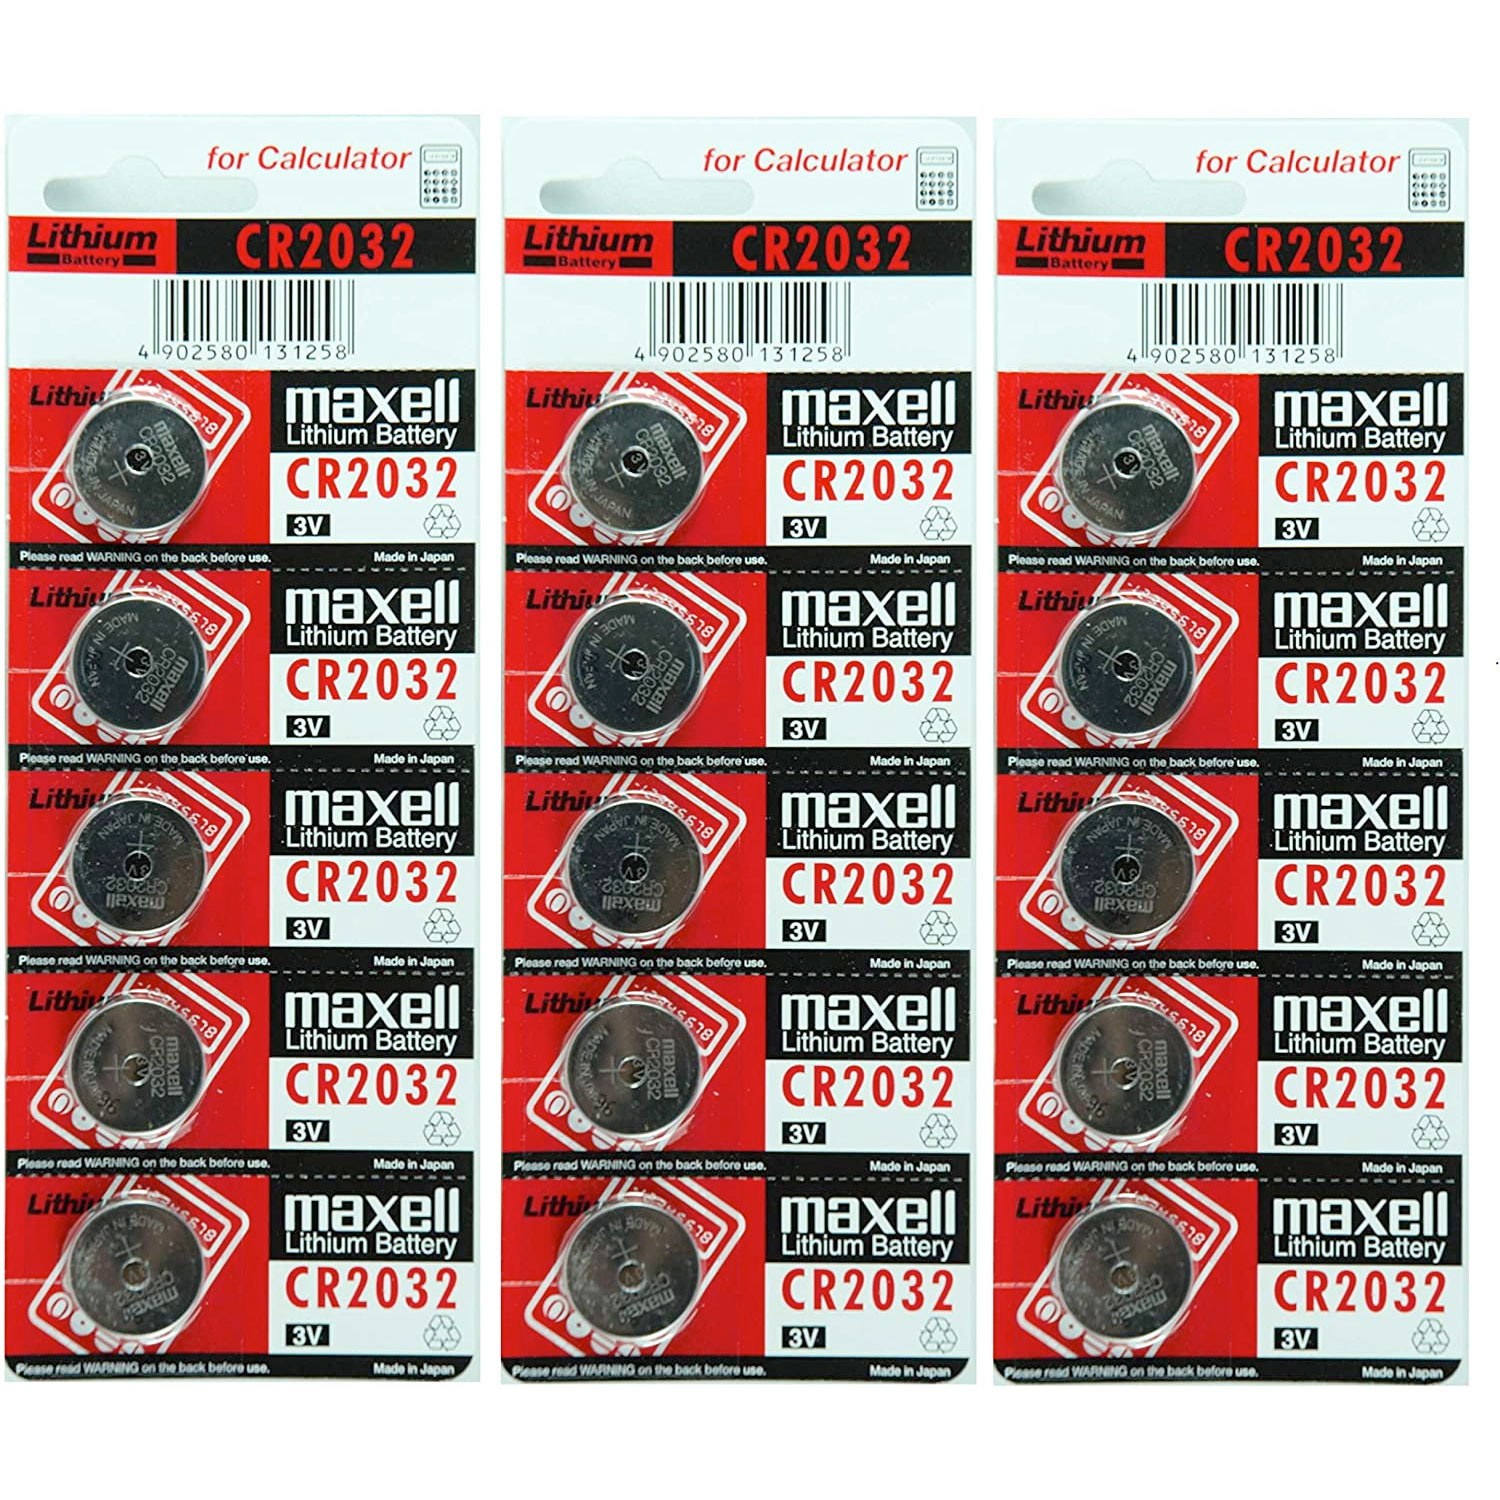 Amazon：Maxell CR2032 3V Lithium Coin Batteries (15 Count)只卖$10.69